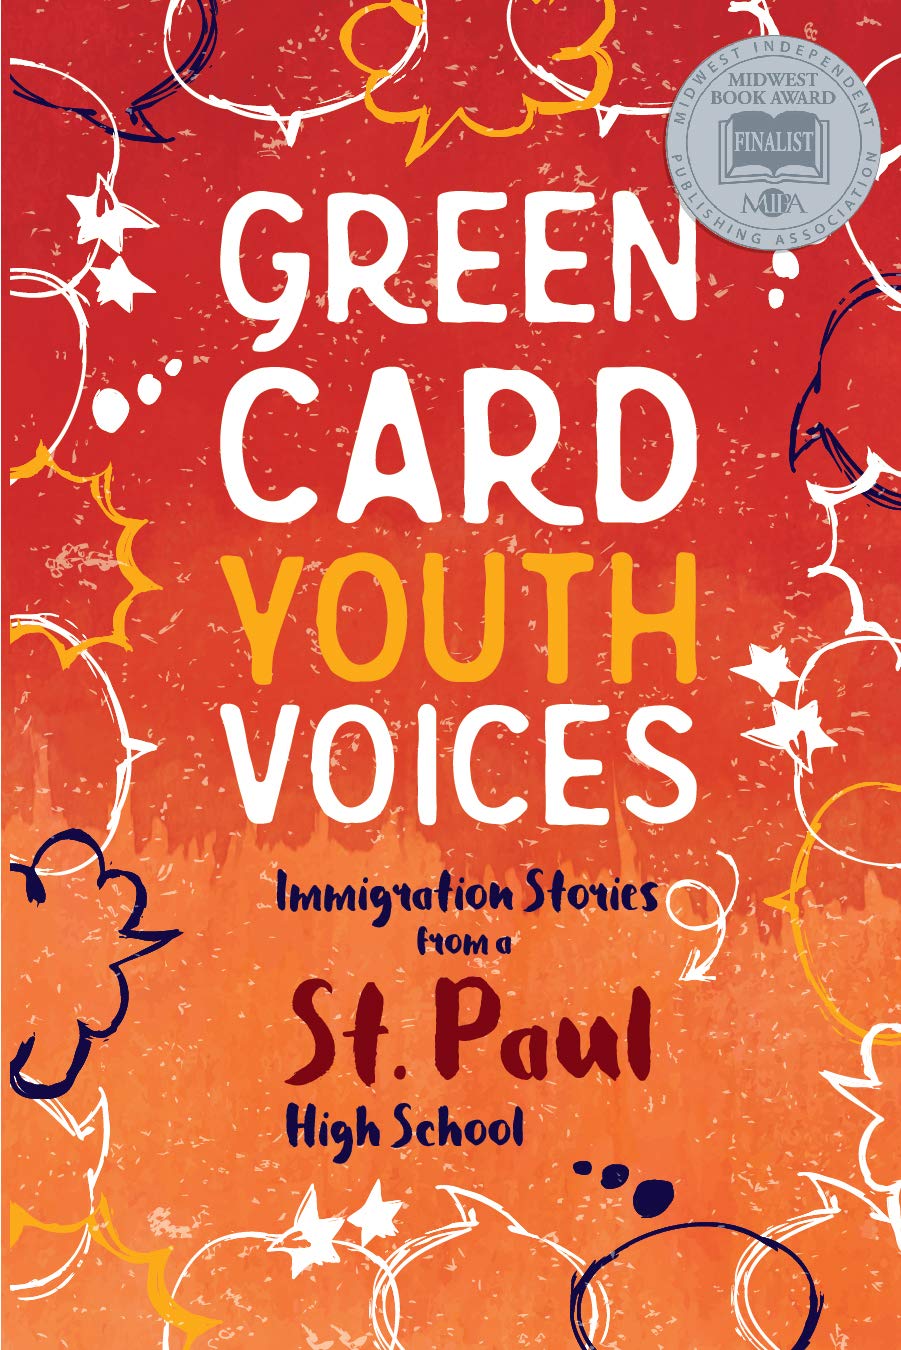 Green Card Youth Voices (Immigration Stories from a St.Paul High School)